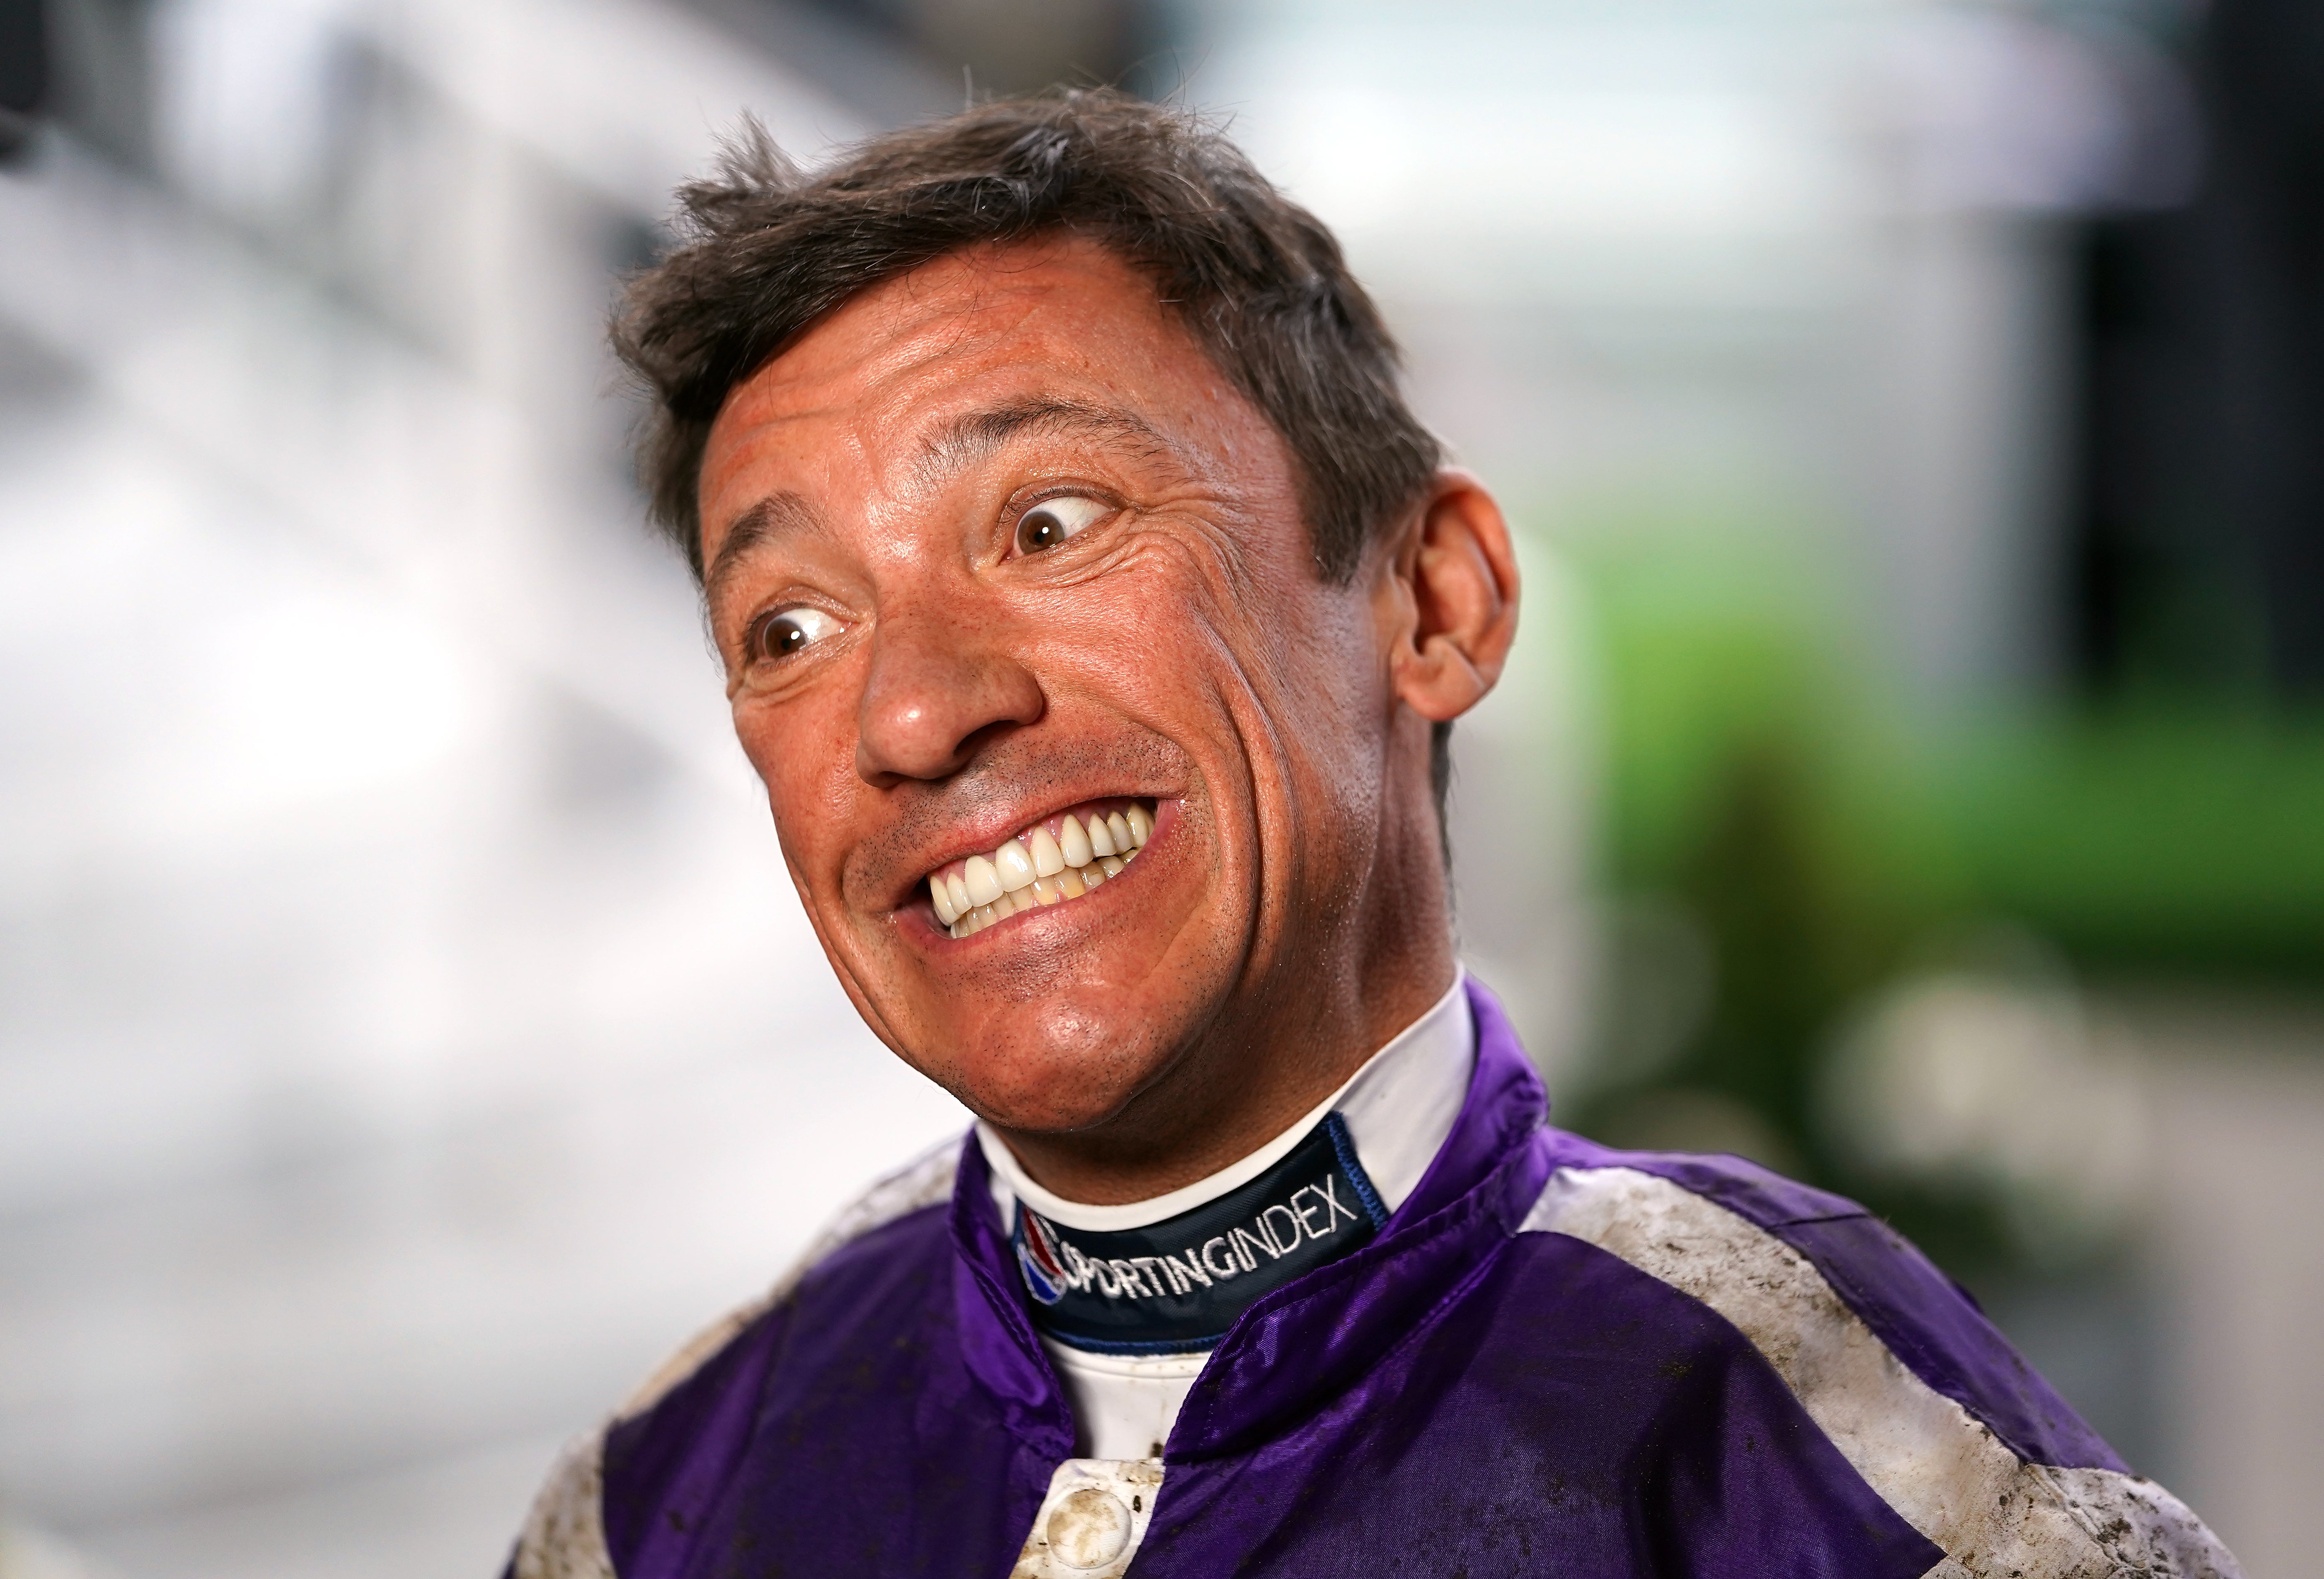 Frankie Dettori's Cazoo Oaks victory on Snowfall was the 21st British Classic of his career